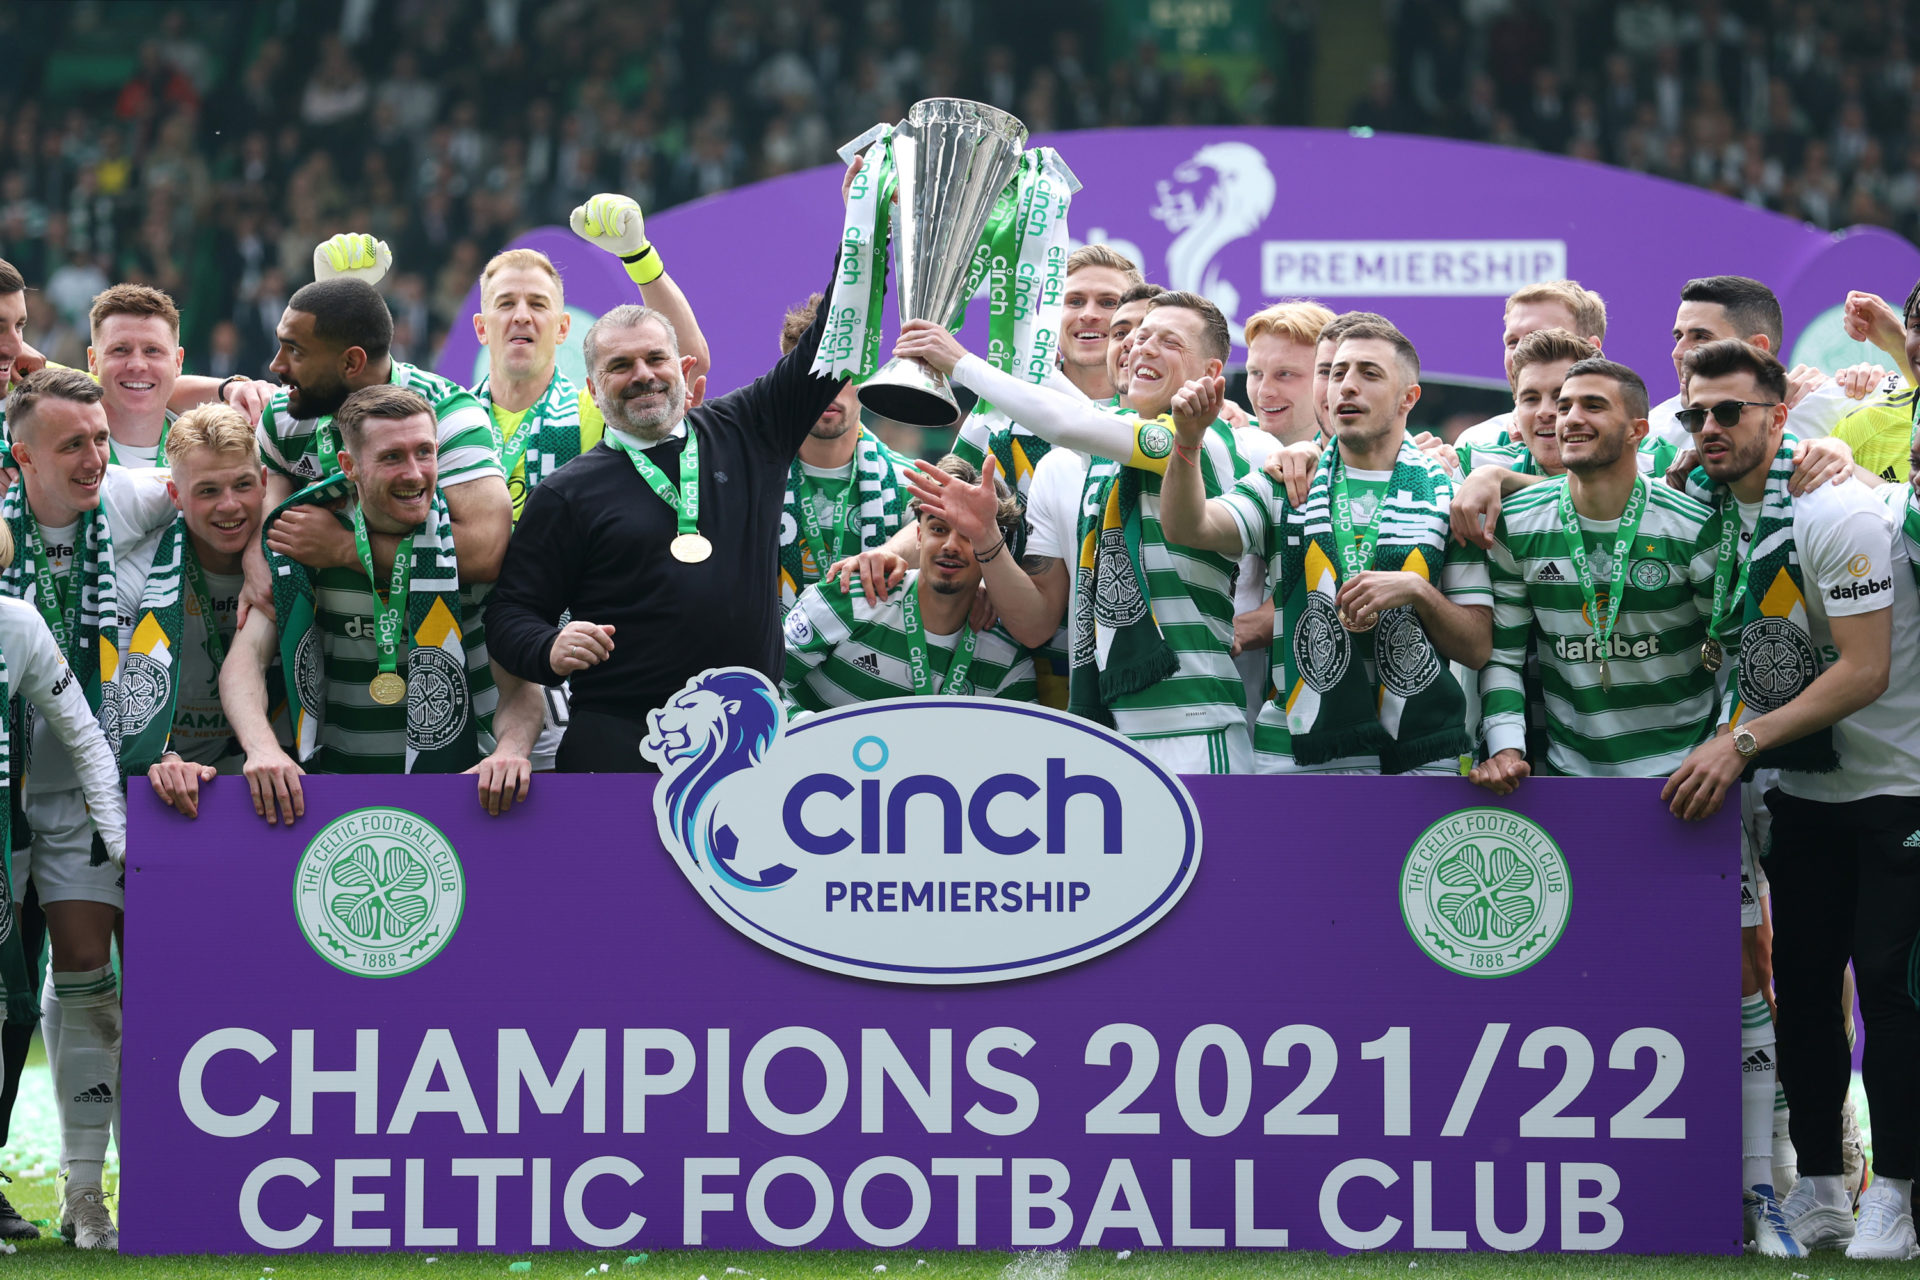 Celtic needed experience to get back to being champions